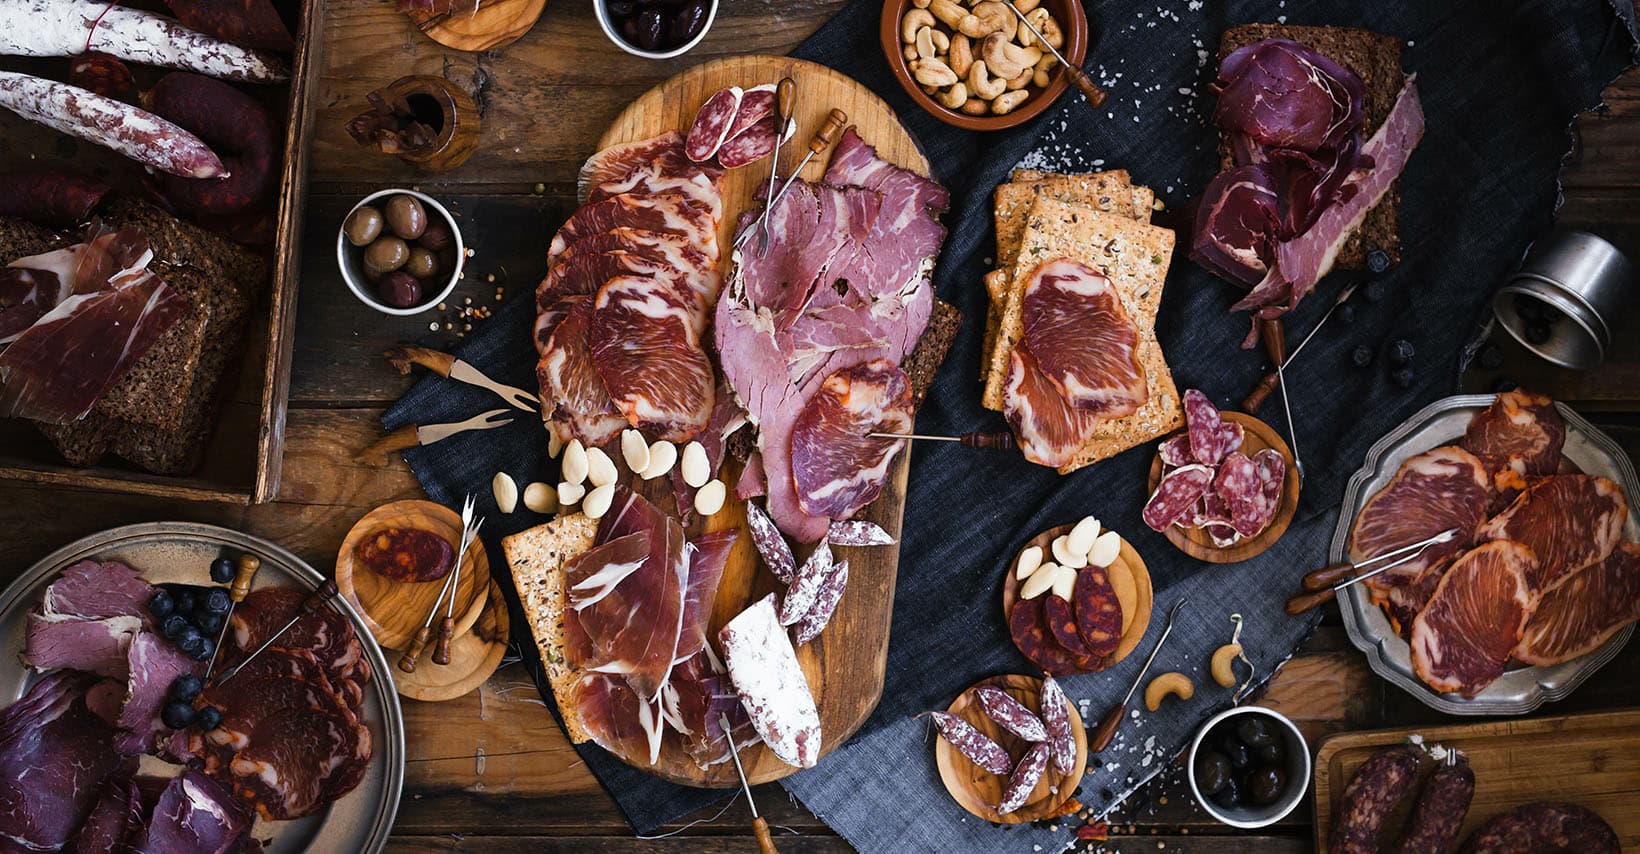 New trends in charcuterie